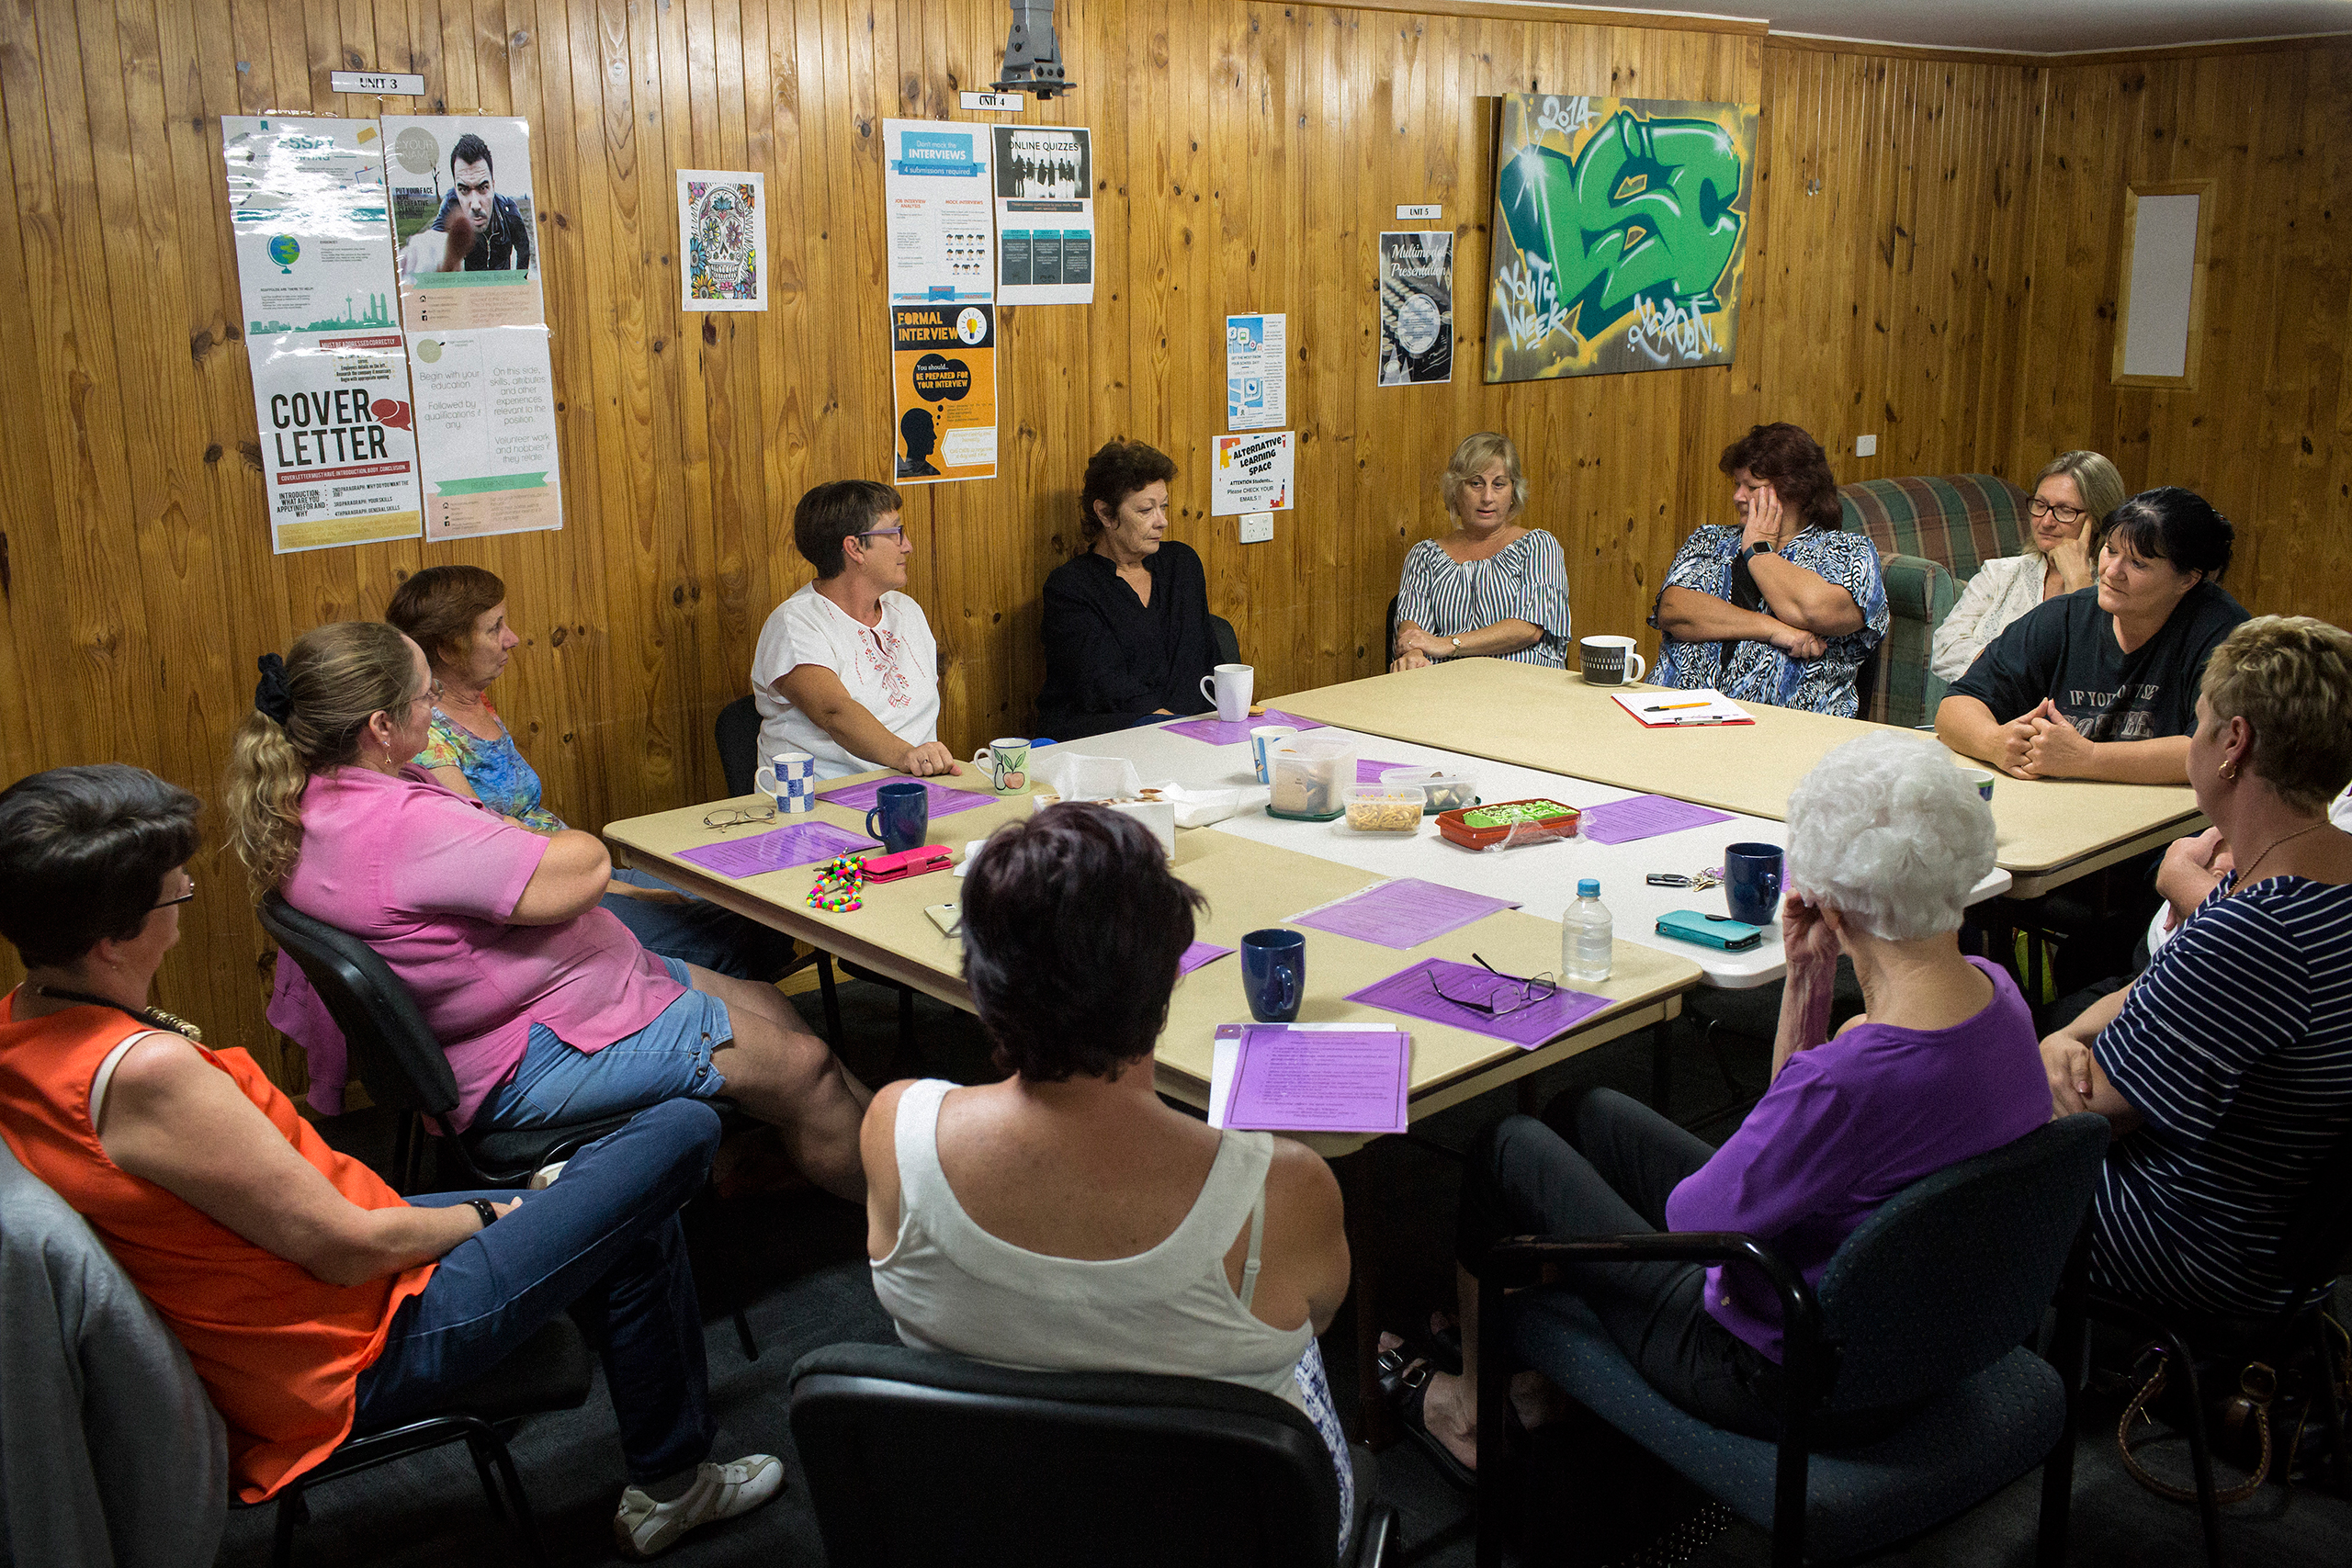 Members of a support group that brings together loved ones of ice addicts at a community center in Yeppoon, north of Rockhampton, in April 2017. (David Maurice Smith—Oculi for TIME)